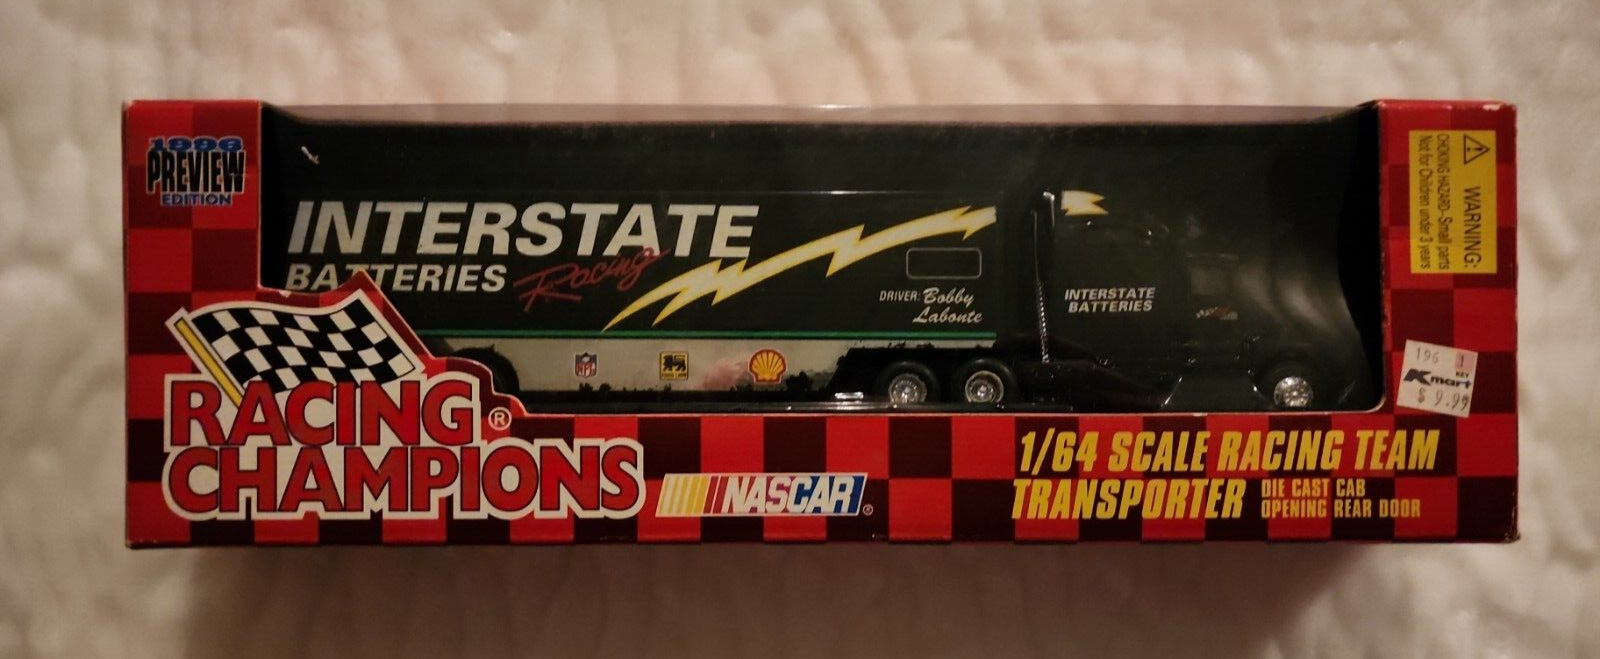 Primary image for BOBBY LABONTE #18 NASCAR Racing Champions 1:64 Scale Team Transporter 1996 Ed.